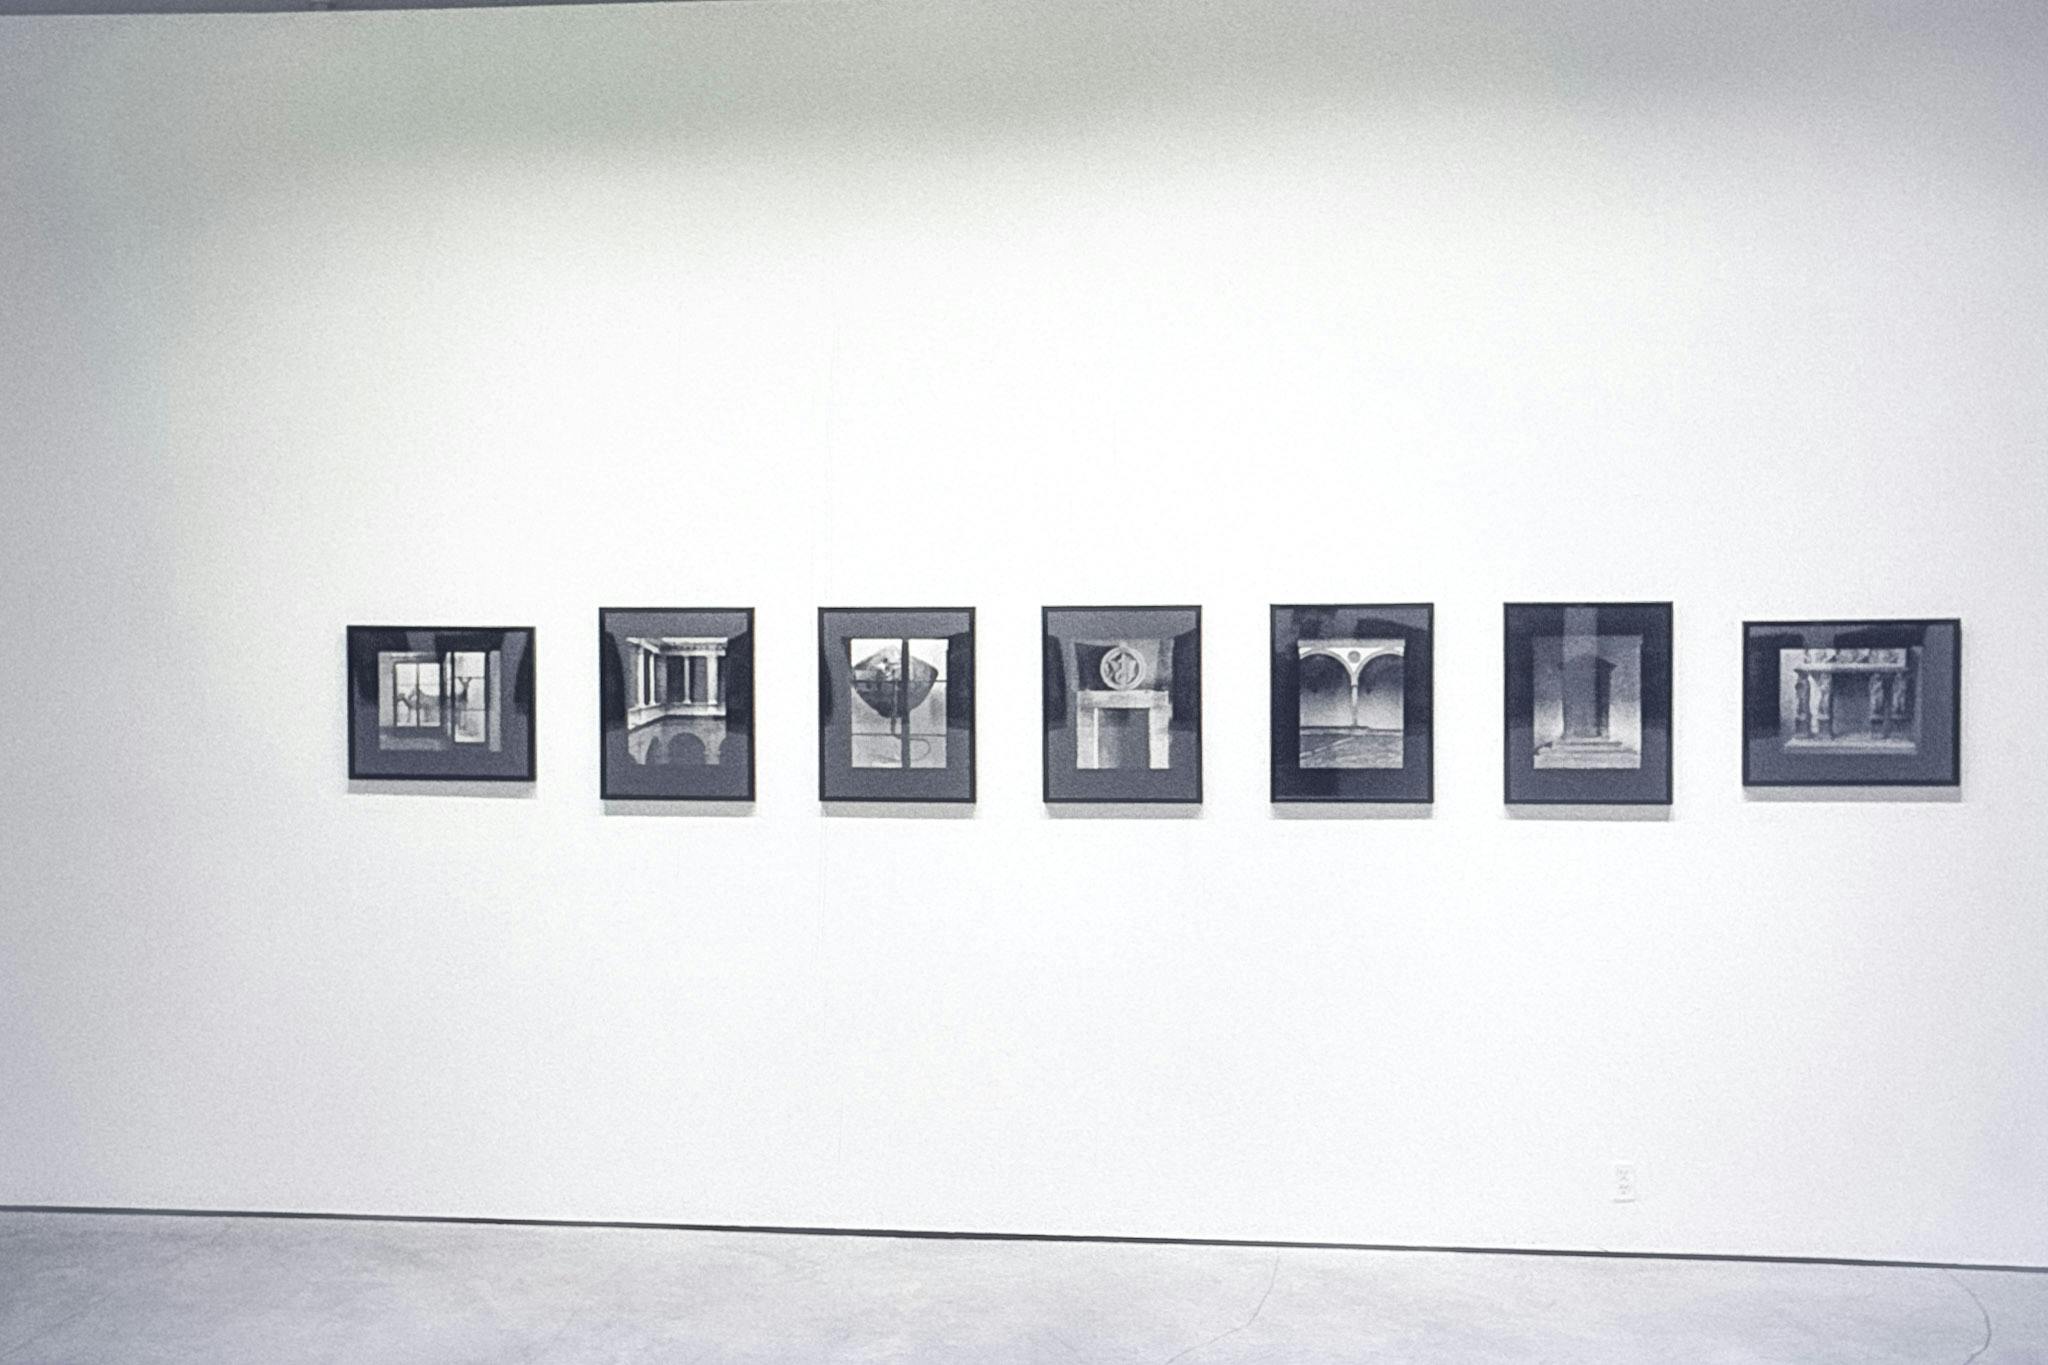 Seven photos in black frames on a wall. All the photos are black and white, showing different arches and doorways. The two photos on the ends are horizontal, and the rest, in the centre, are vertical. 